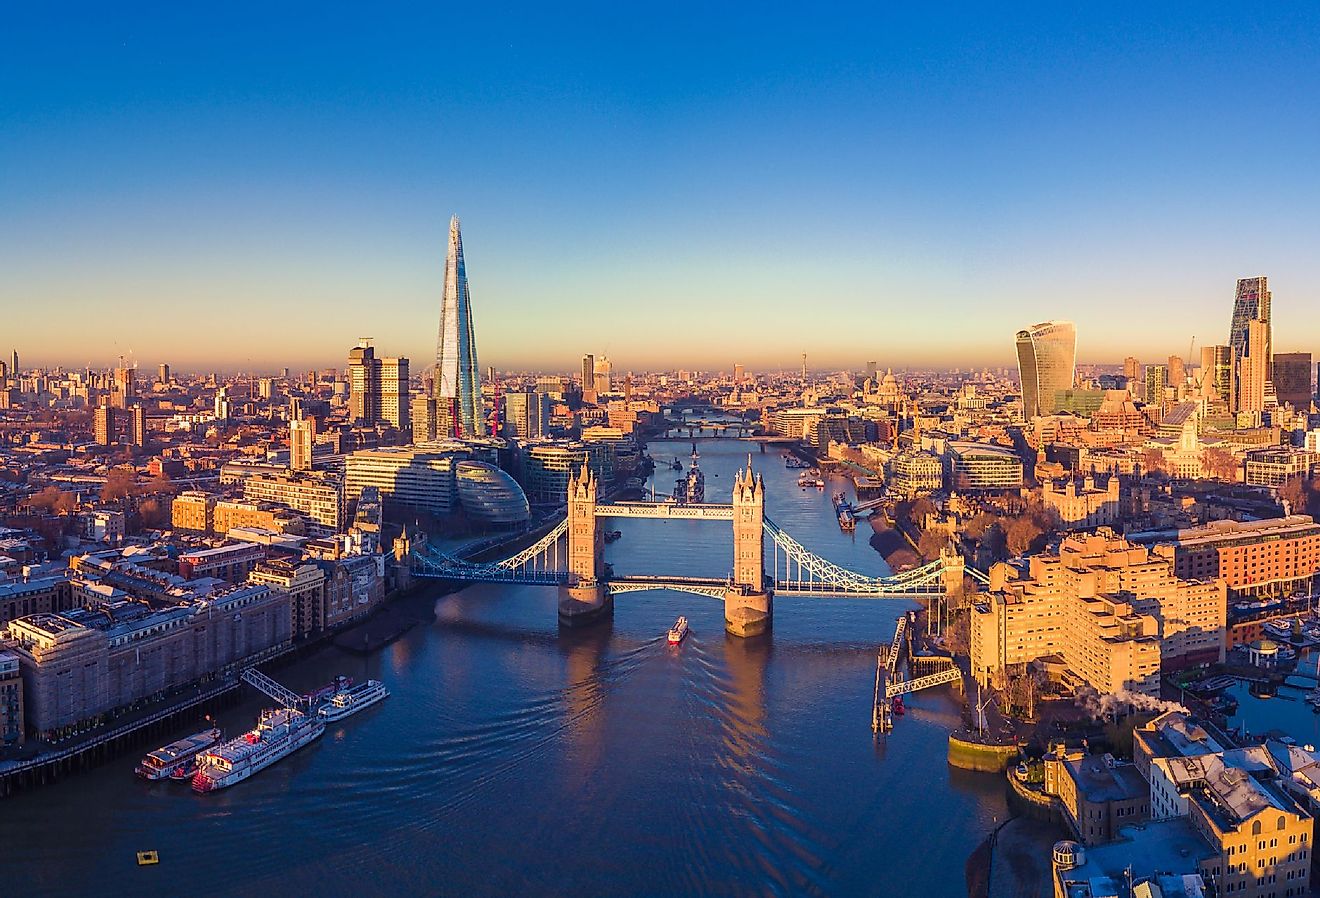 Aerial cityscape view of London and the River Thames. Image credit Engel Ching via Shutterstock